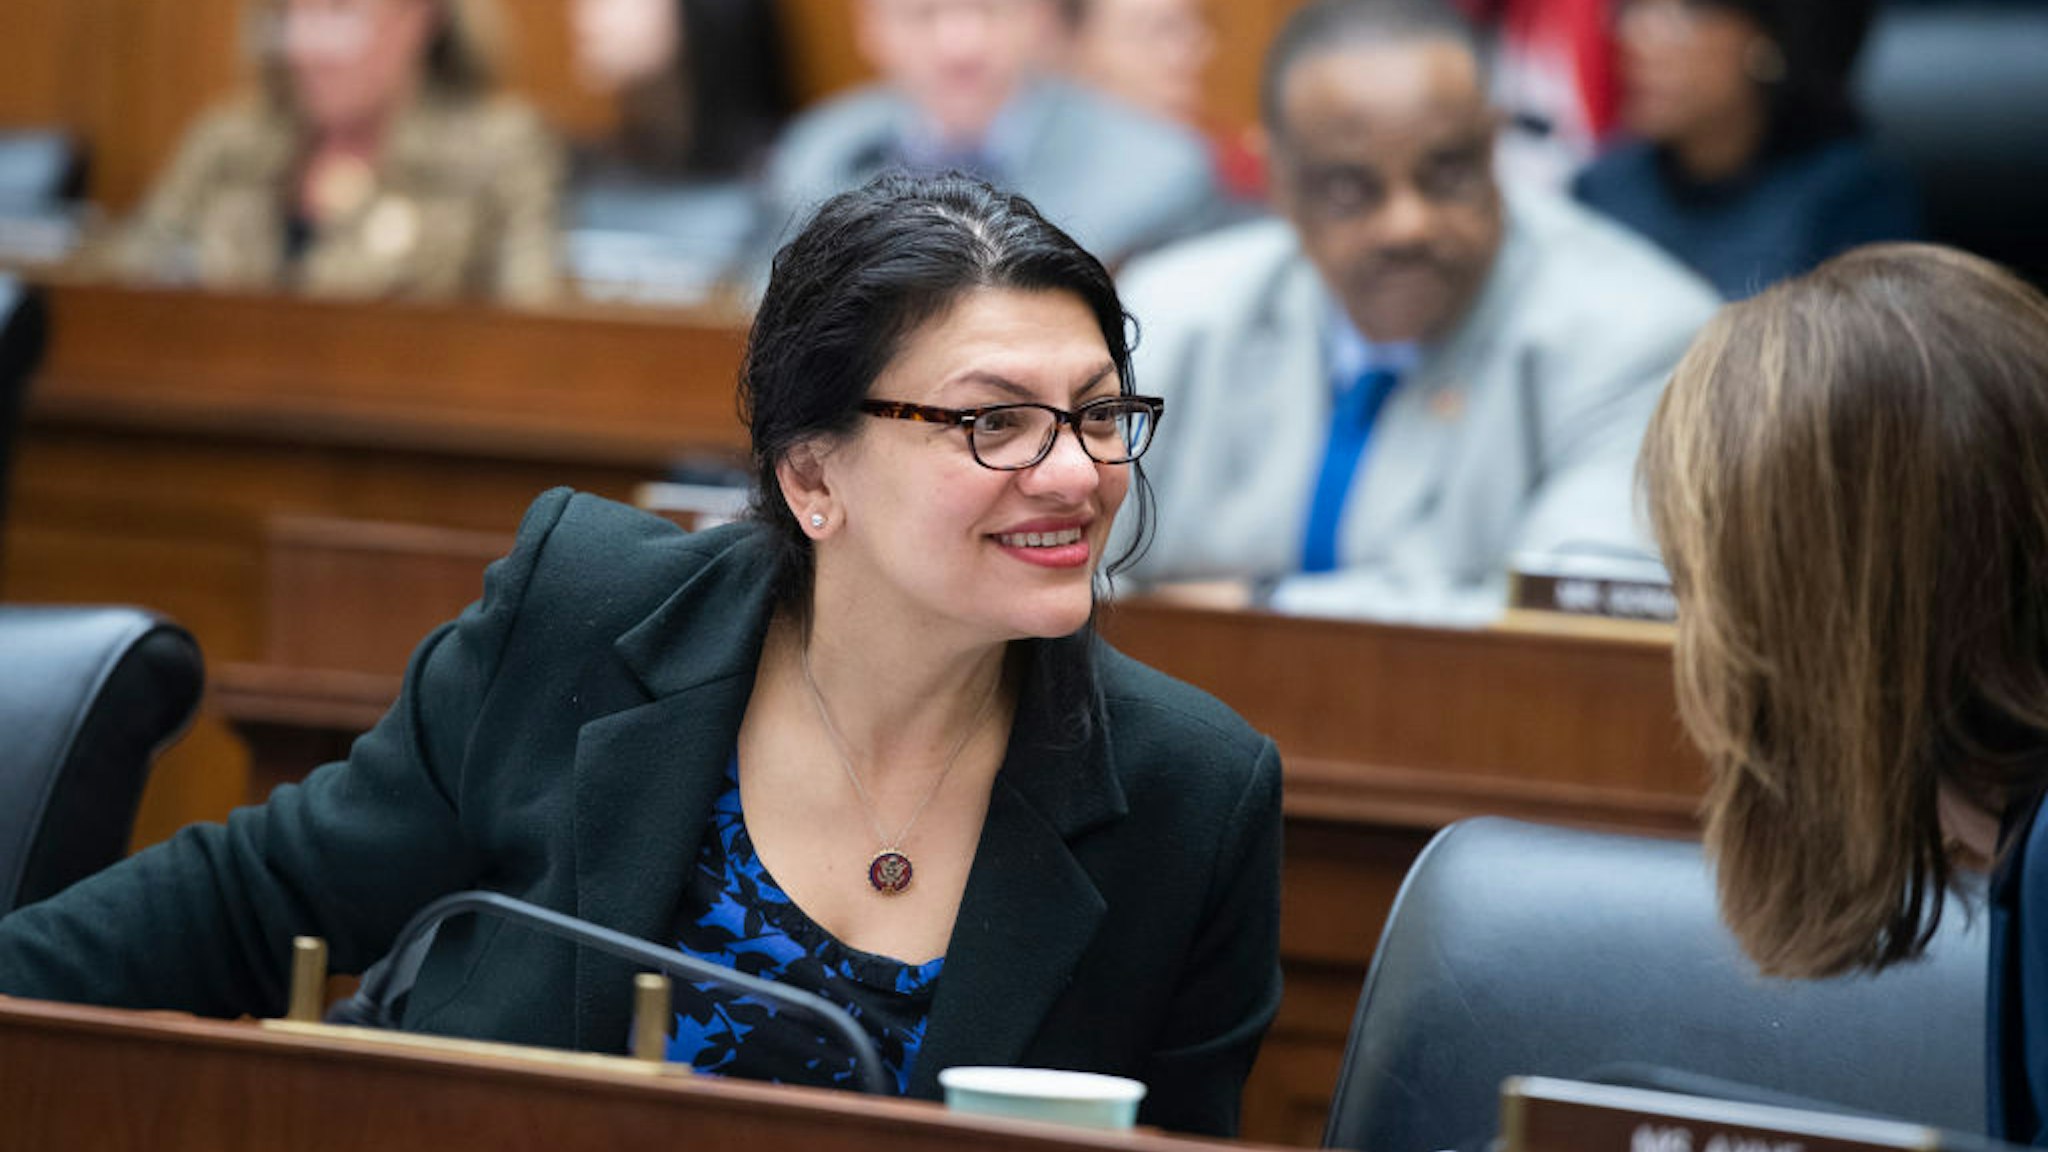 UNITED STATES - FEBRUARY 27: Rep. Rashida Tlaib, D-Mich., attends the House Financial Services Committee markup on the Housing Fairness Act of 2020 and many other amendments in Rayburn Building on Thursday, February 27, 2020. (Photo By Tom Williams/CQ-Roll Call, Inc via Getty Images)